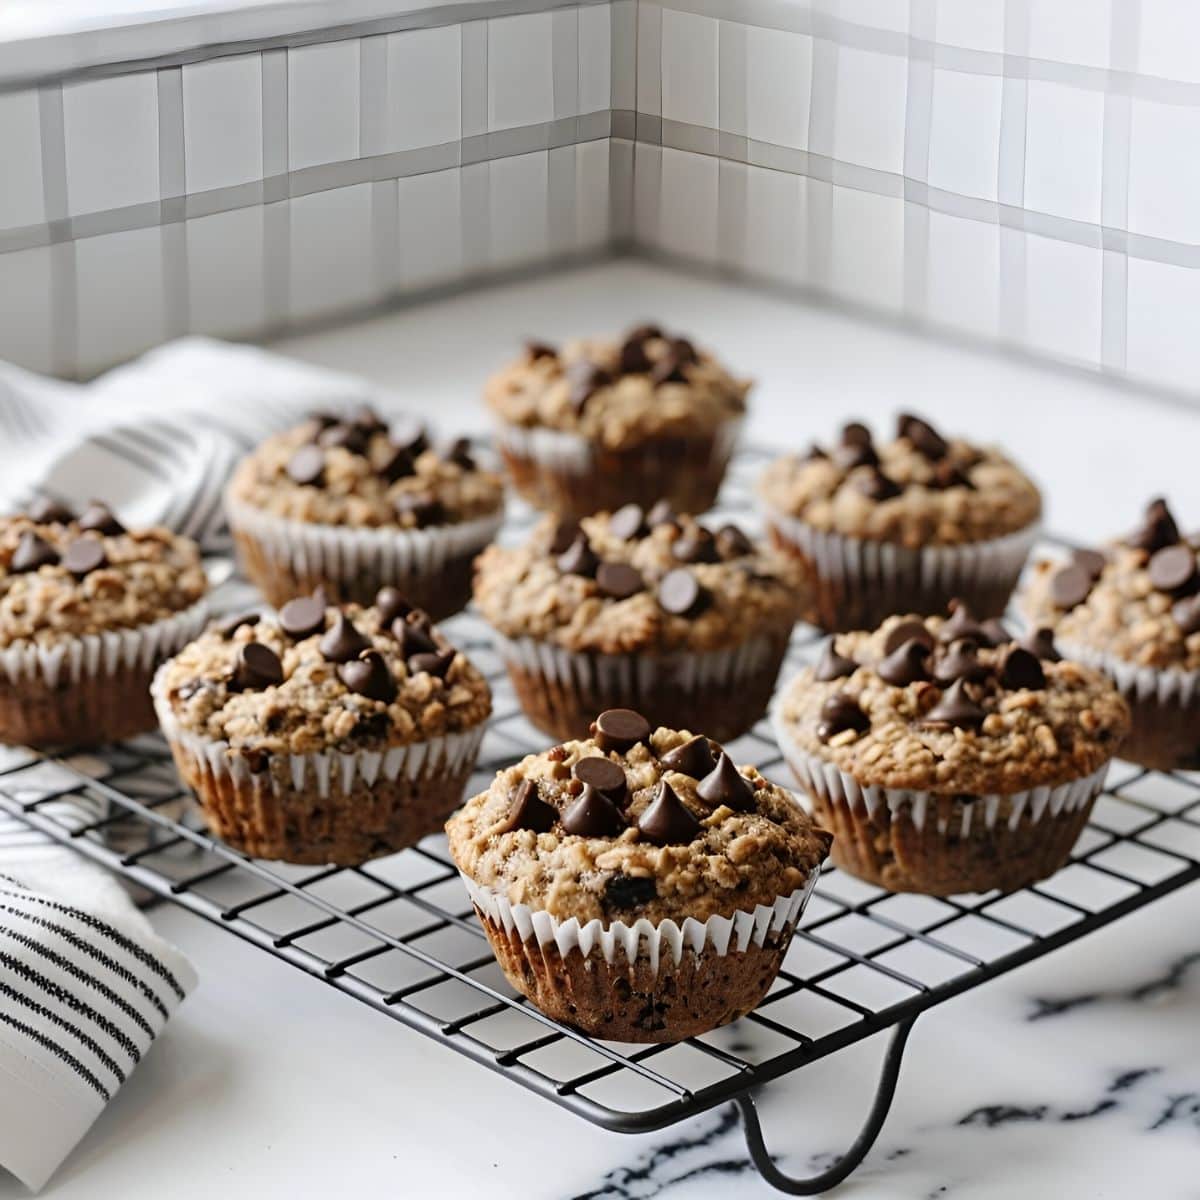 Chocolate Chip Oatmeal Muffins in Liners Cooling on a Wire Rack on a White Marble Countertop